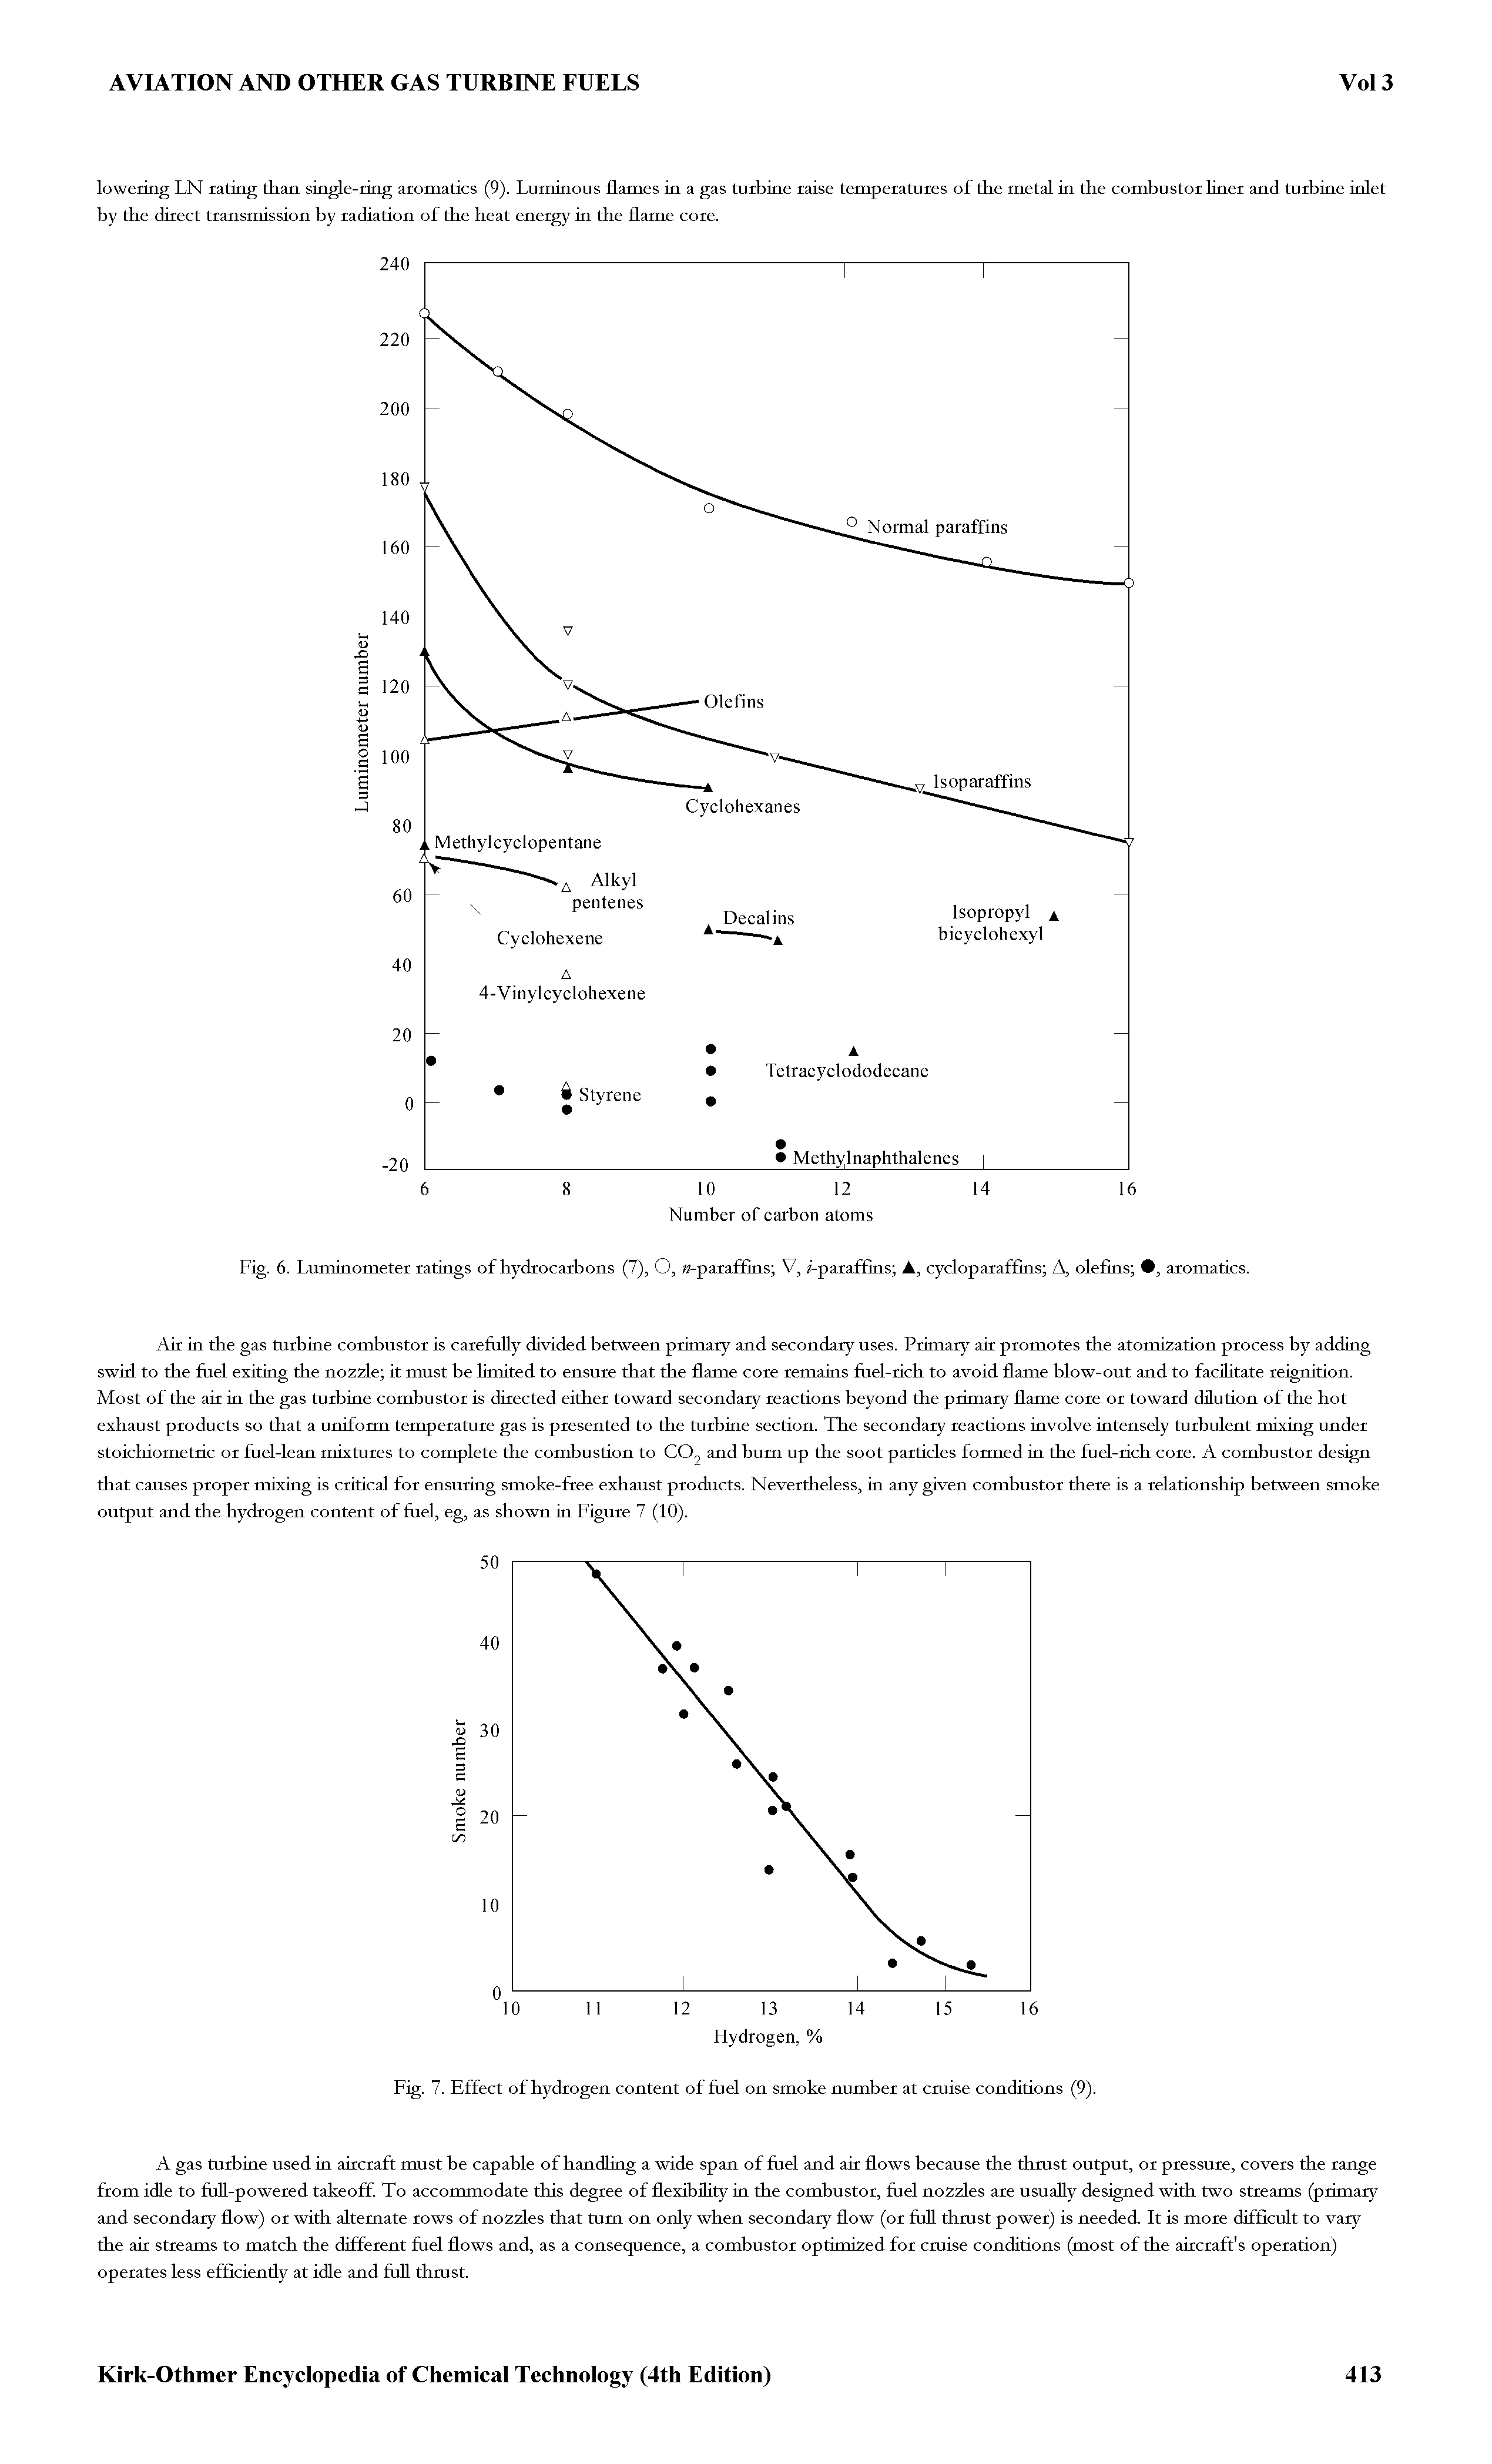 Fig. 7. Effect of hydrogen content of fuel on smoke number at cmise conditions (9).